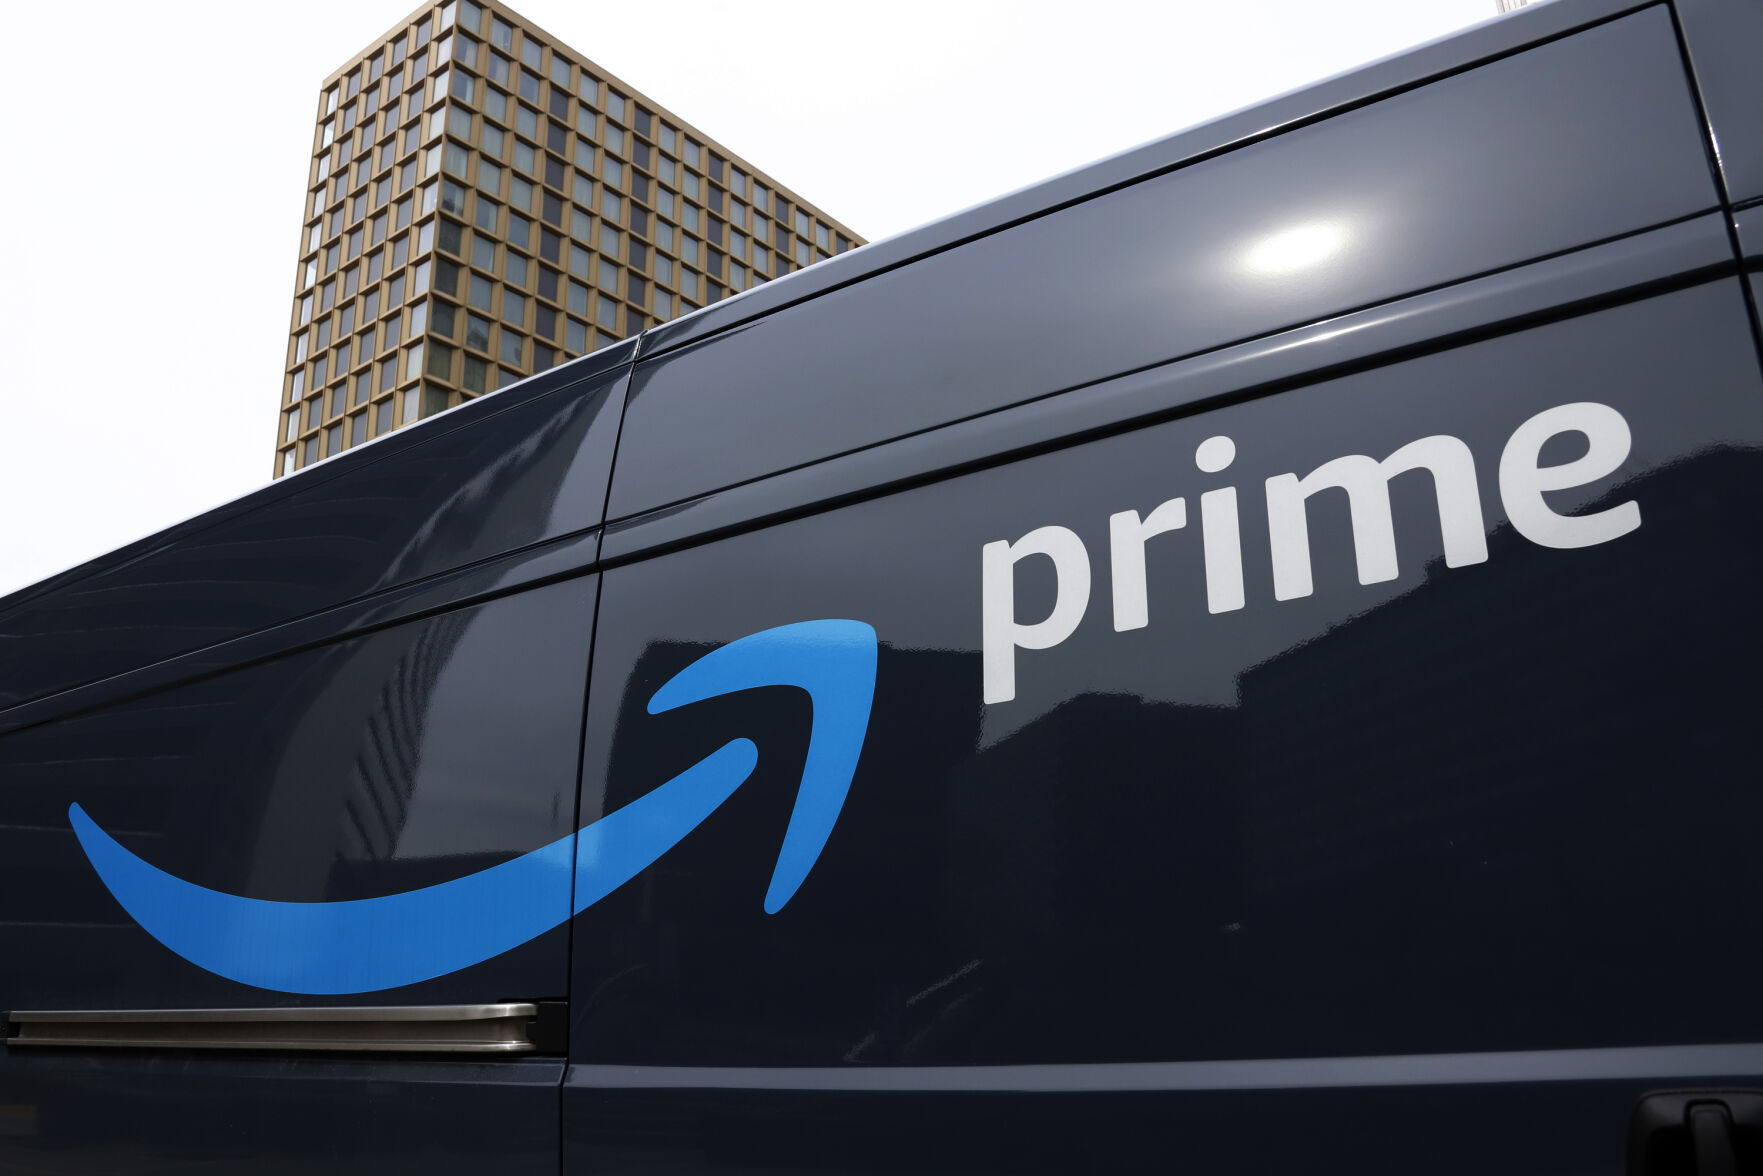 <p>FILE - An Amazon Prime delivery vehicle is seen in downtown Pittsburgh on March 18, 2020. The Federal Trade Commission sued Amazon on Wednesday for what it called a years-long effort to enroll consumers without consent into its Prime program and making it difficult for them to cancel their subscriptions. (AP Photo/Gene J. Puskar, File)</p>   PHOTO CREDIT: Gene J. Puskar